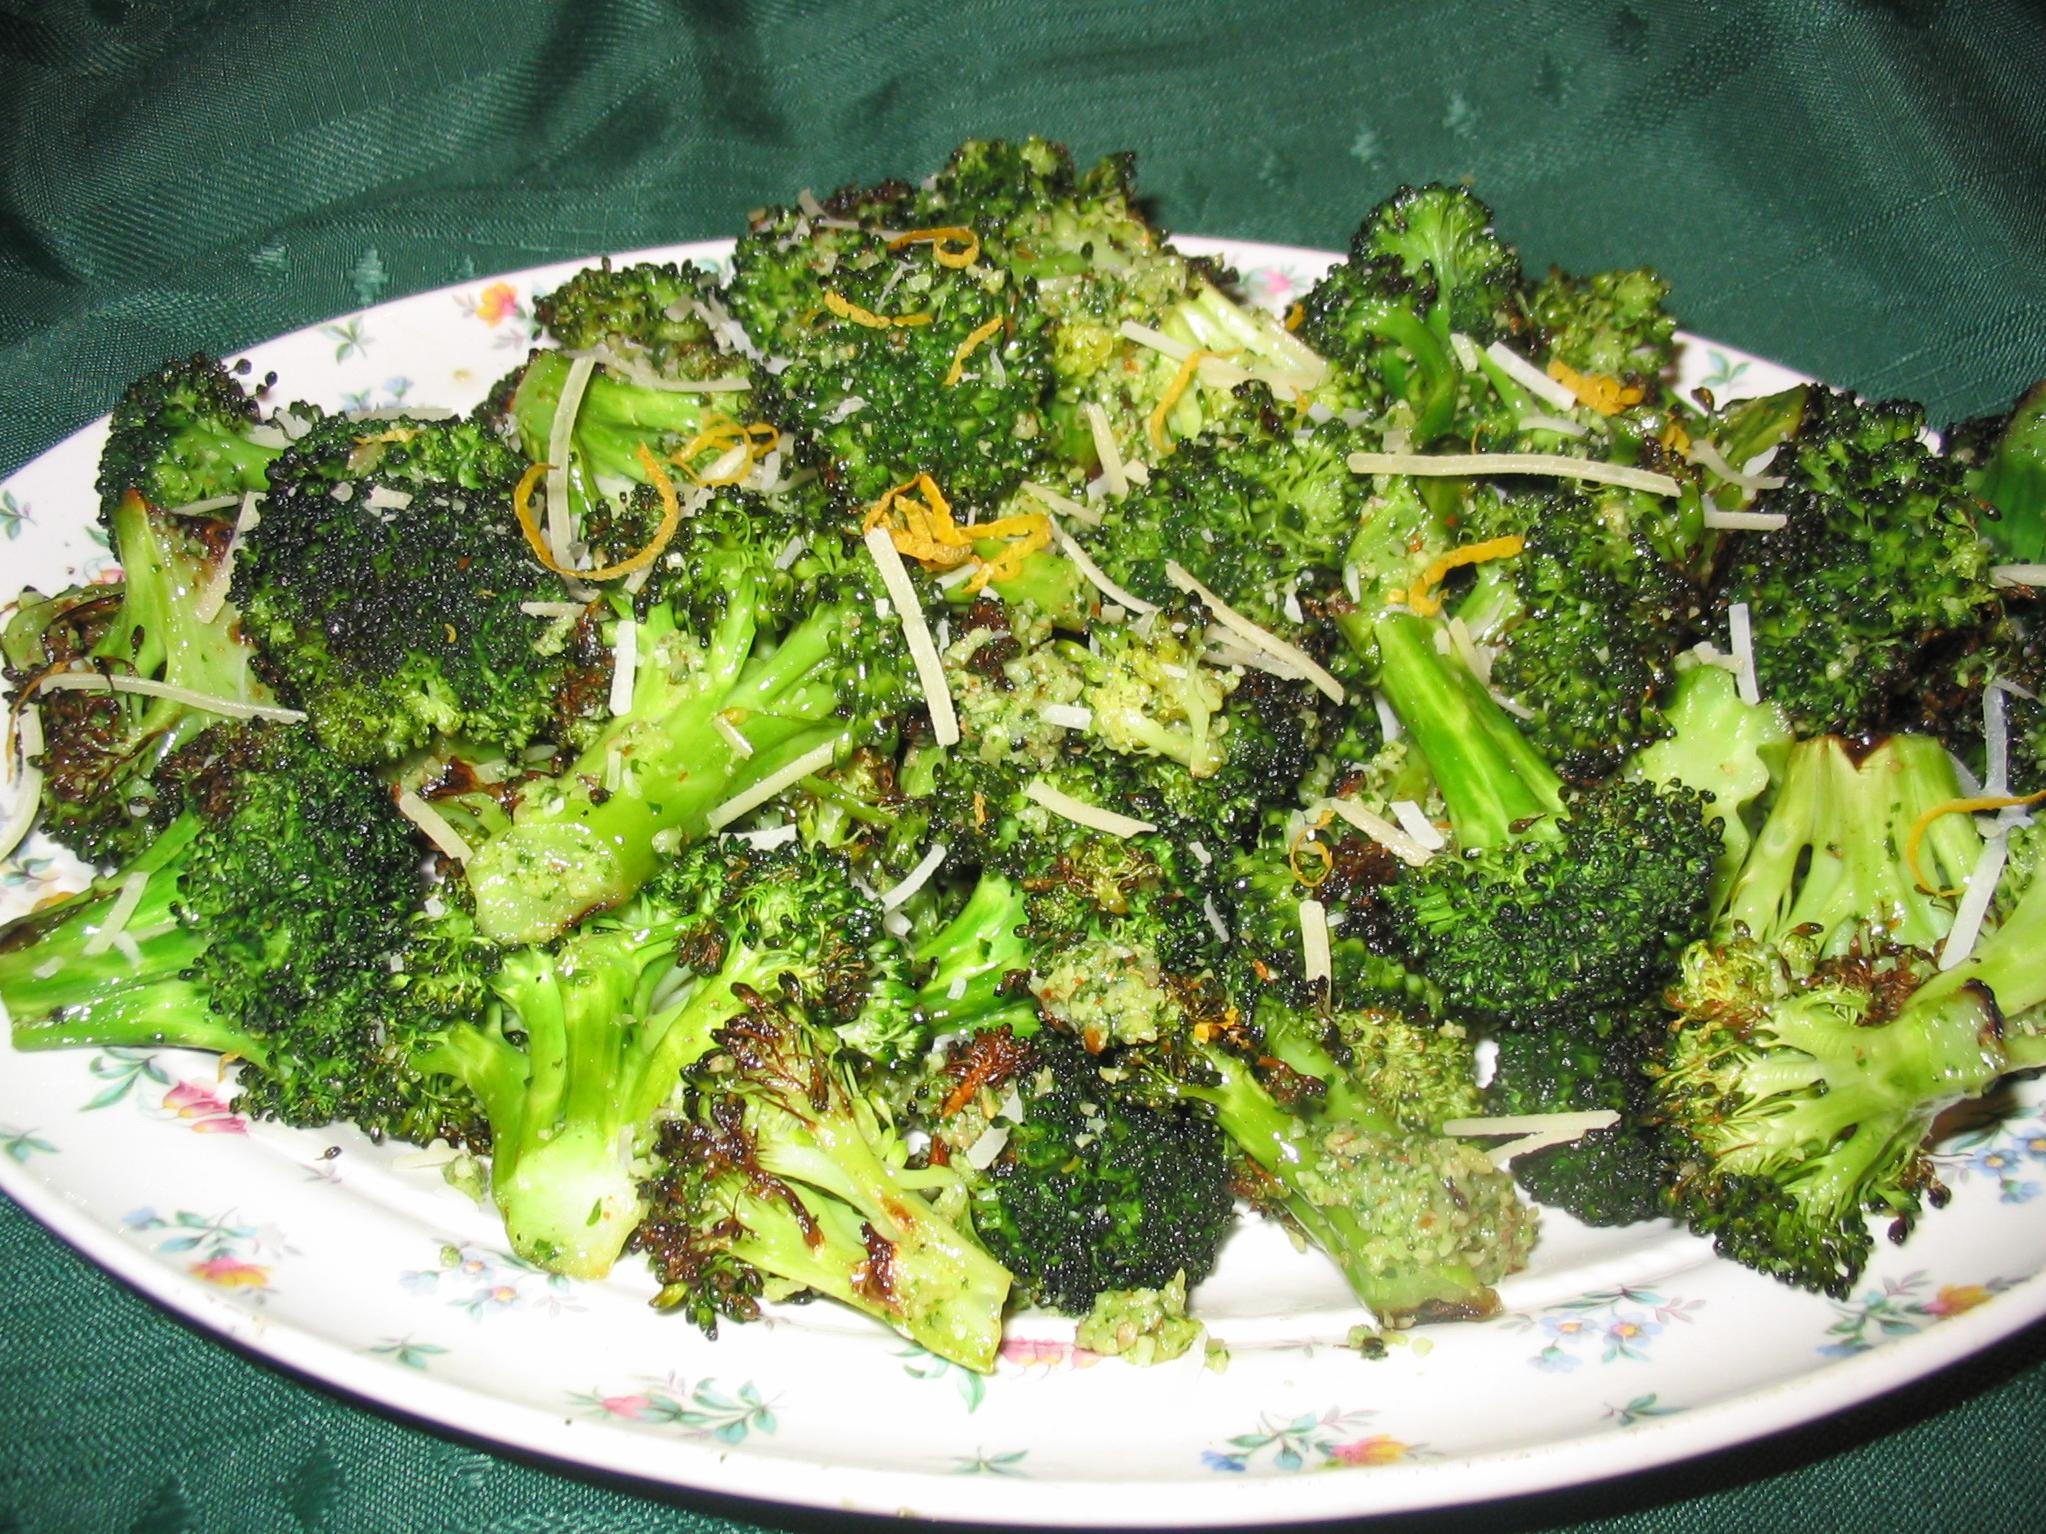  Roasted broccoli never looked this good!